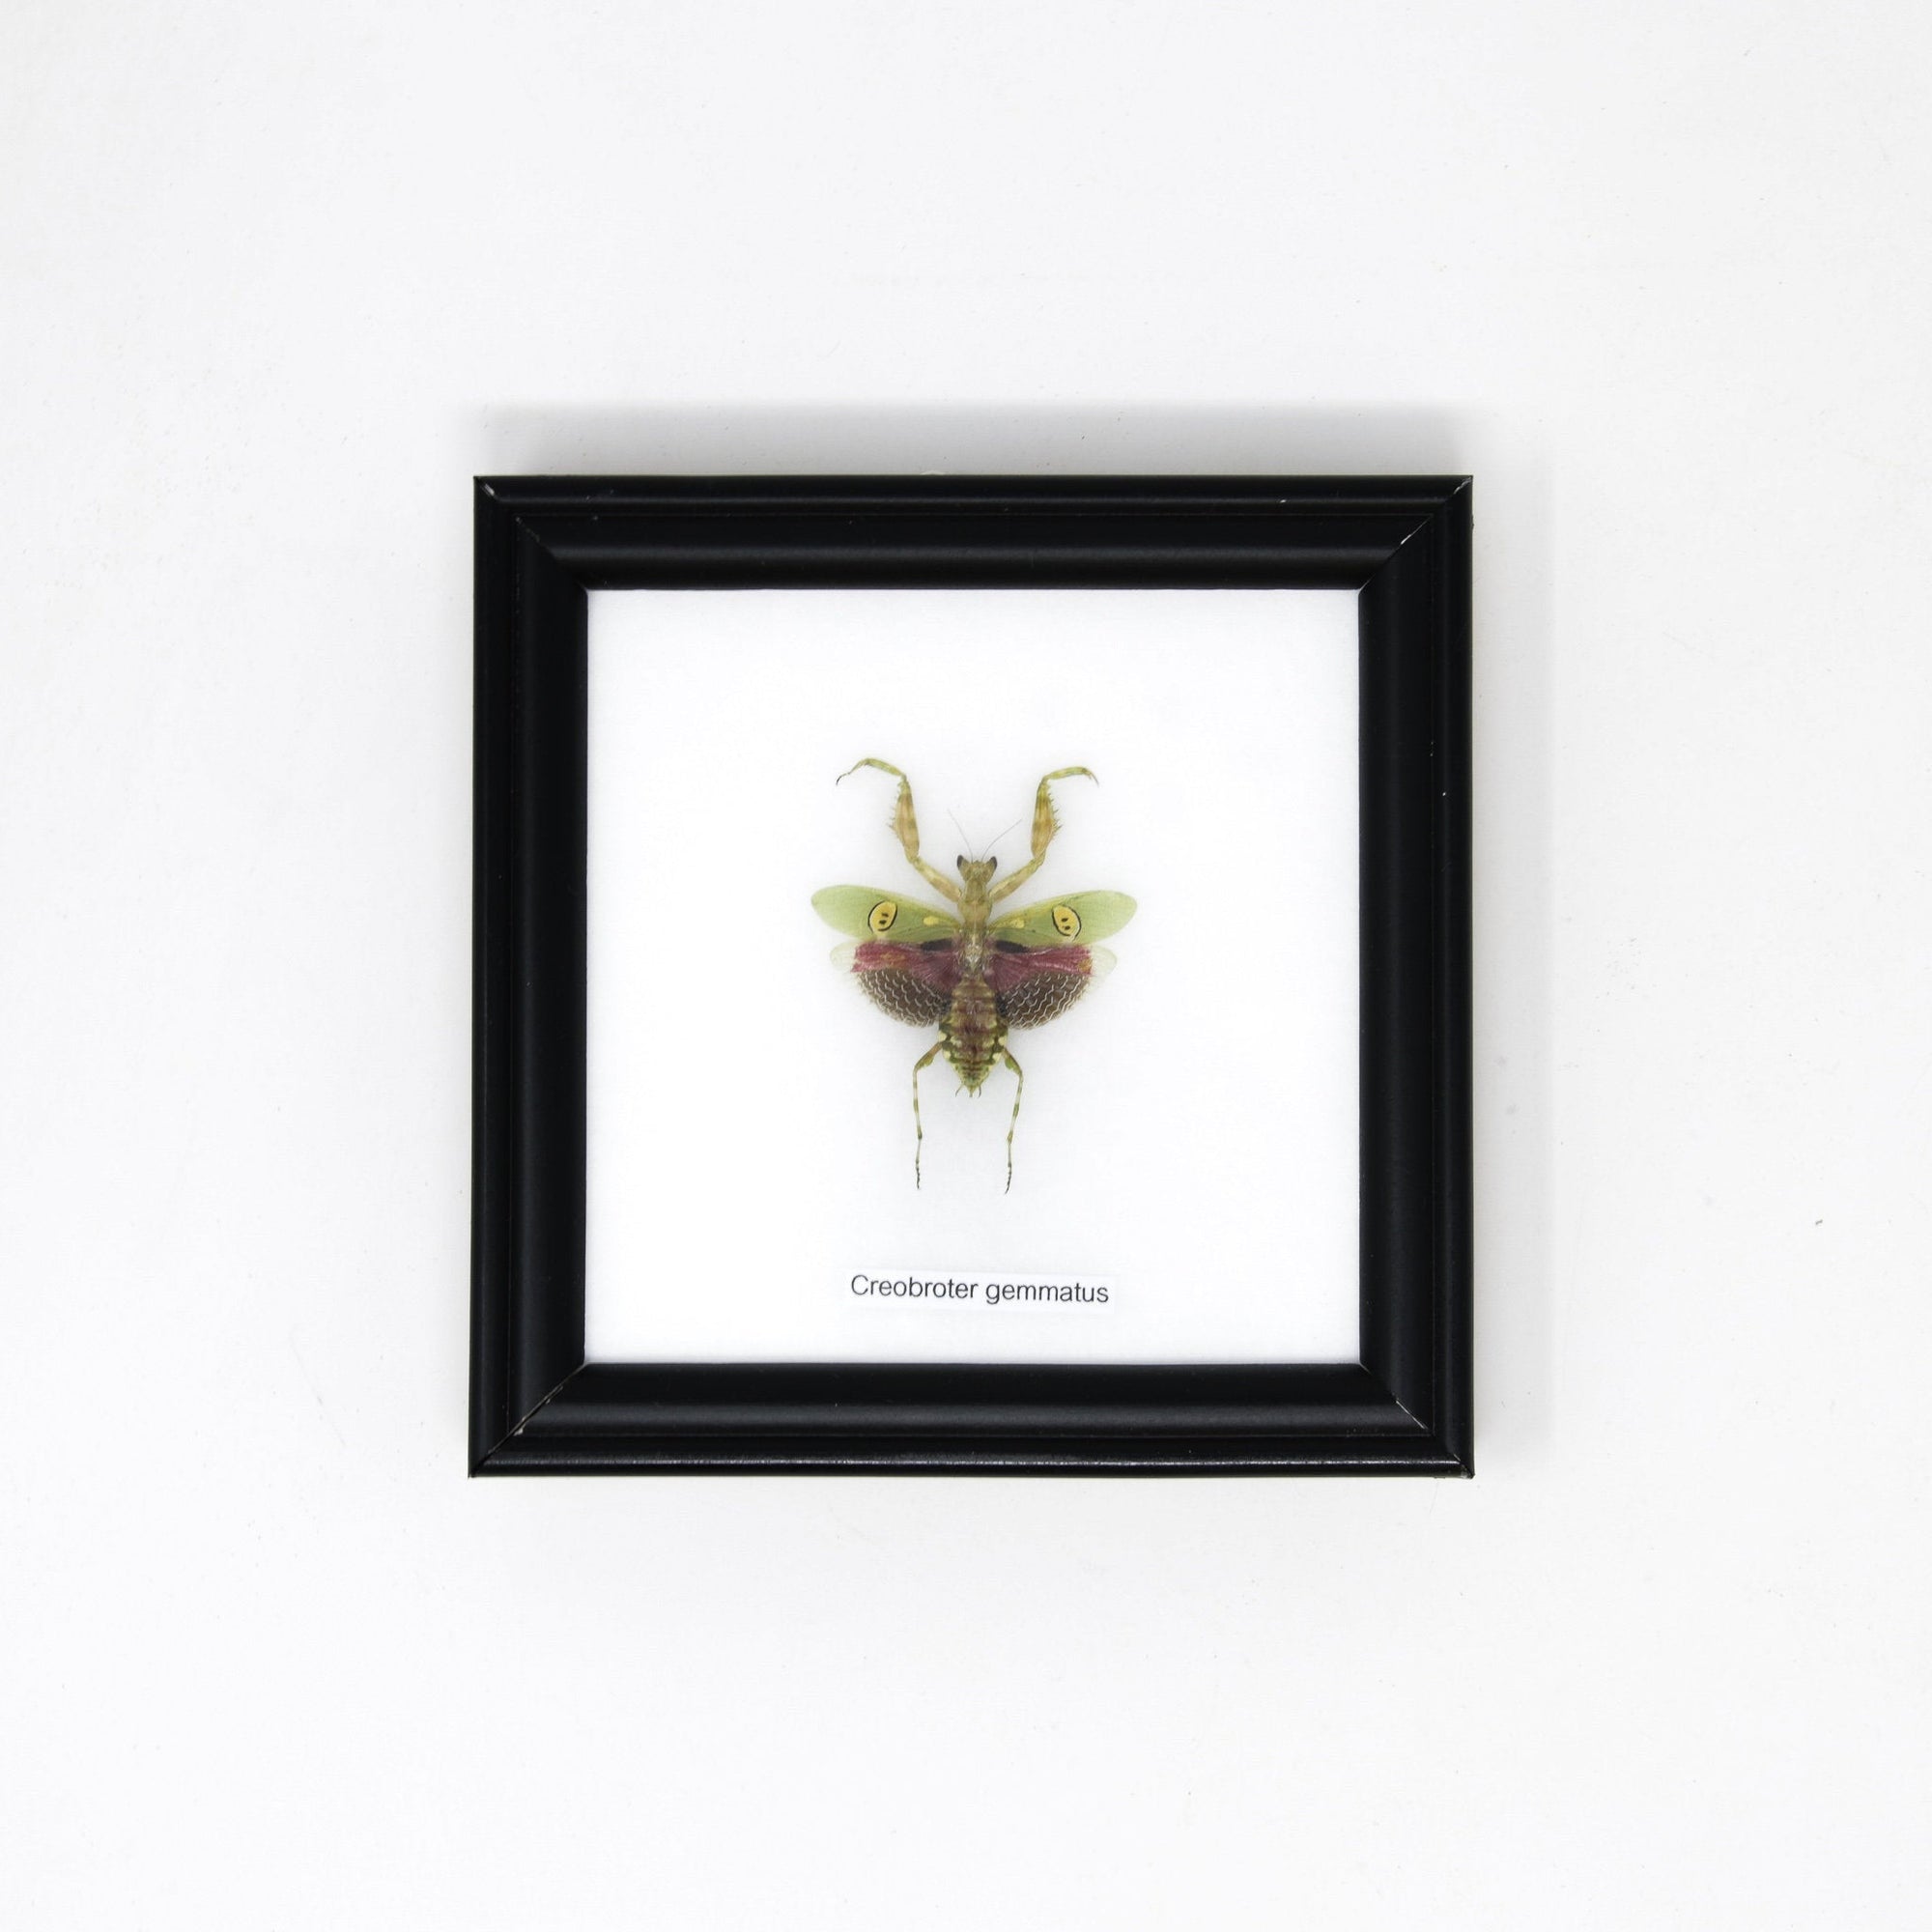 Jeweled Flower Mantis (Creobroter gemmatus) | Real Insect Mounted Under Glass, Wall Hanging Home Décor Framed 5 x 5 In. Gift Boxed